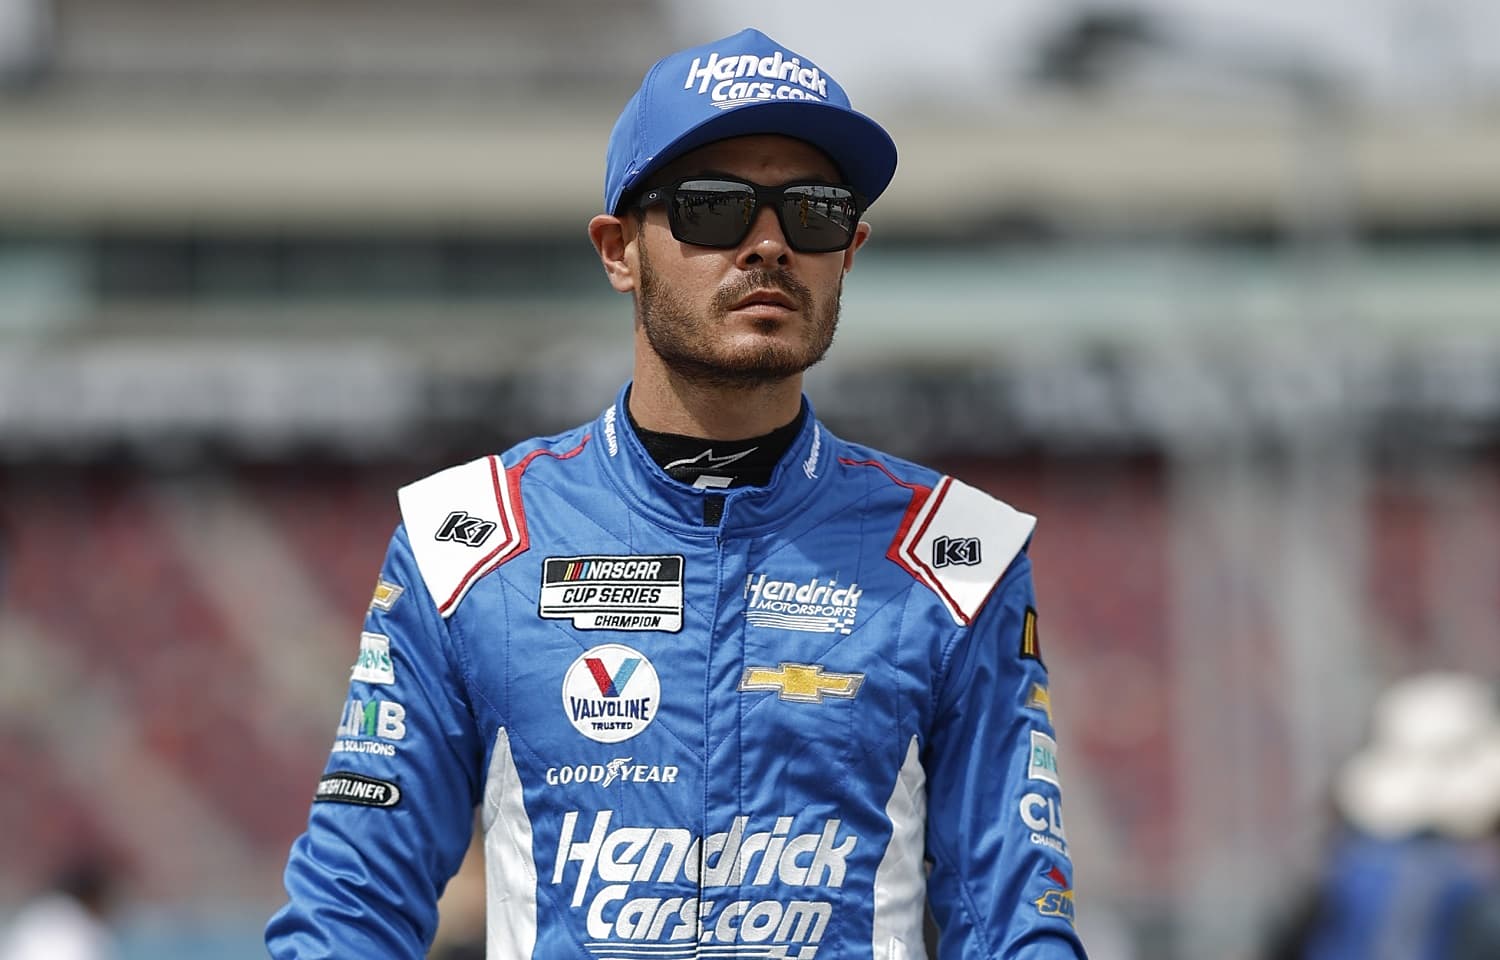 Kyle Larson walks the grid during qualifying for the NASCAR Cup Series United Rentals Work United 500 at Phoenix Raceway on March 11, 2023. | Chris Graythen/Getty Images